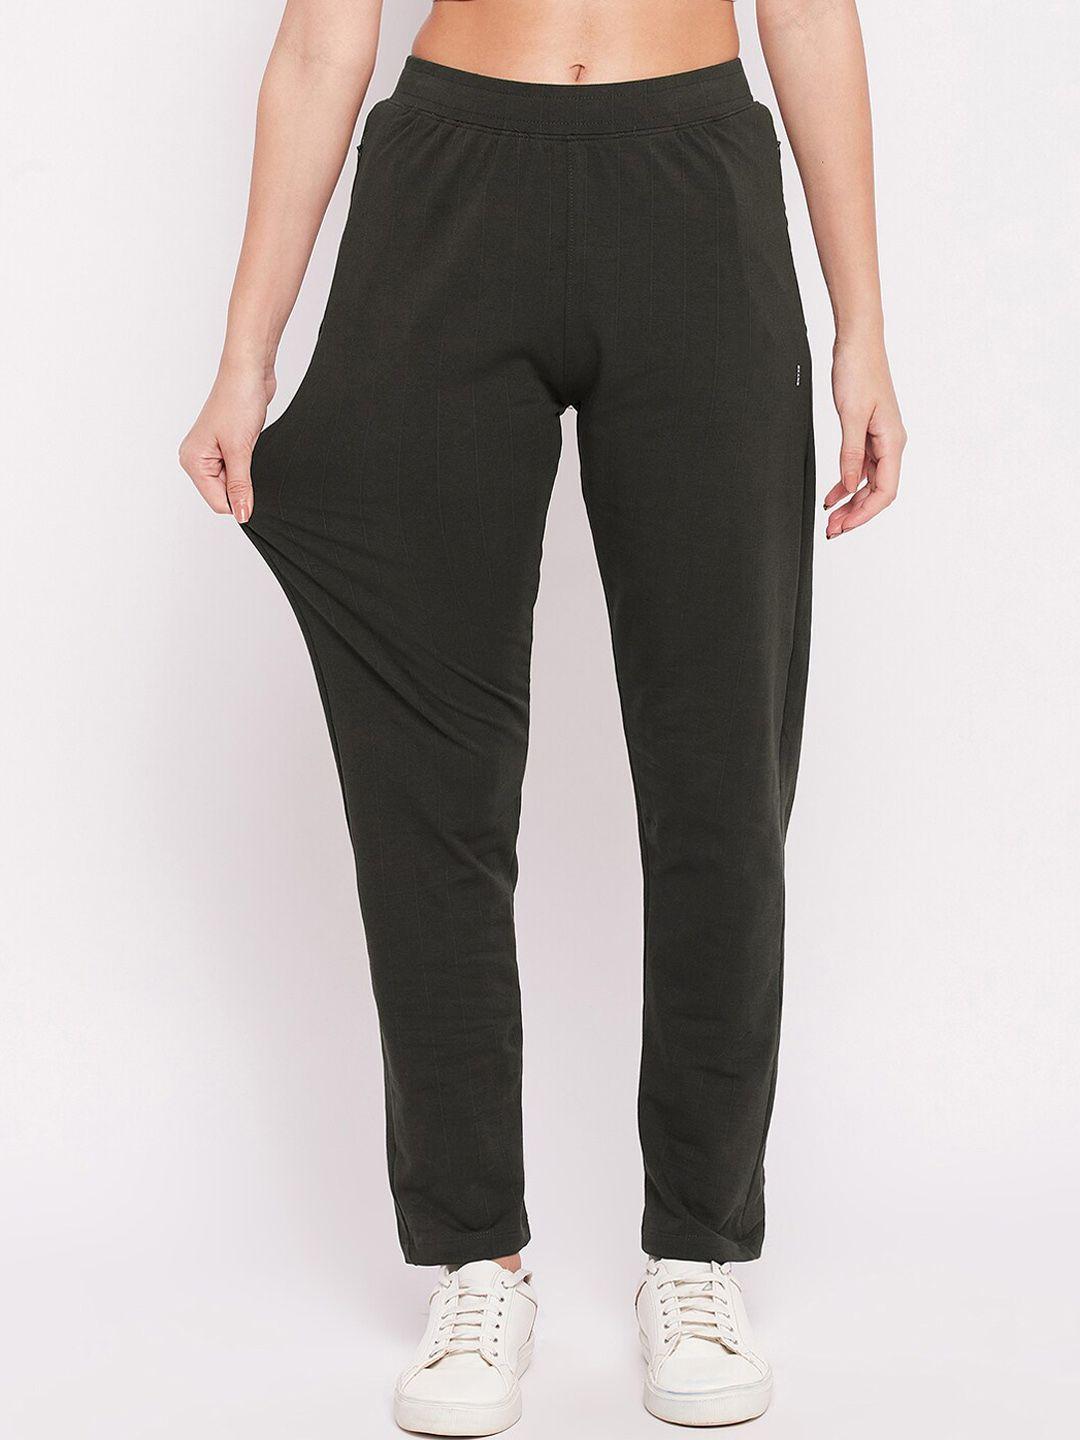 okane-women-olive-green-solid-cotton-track-pants